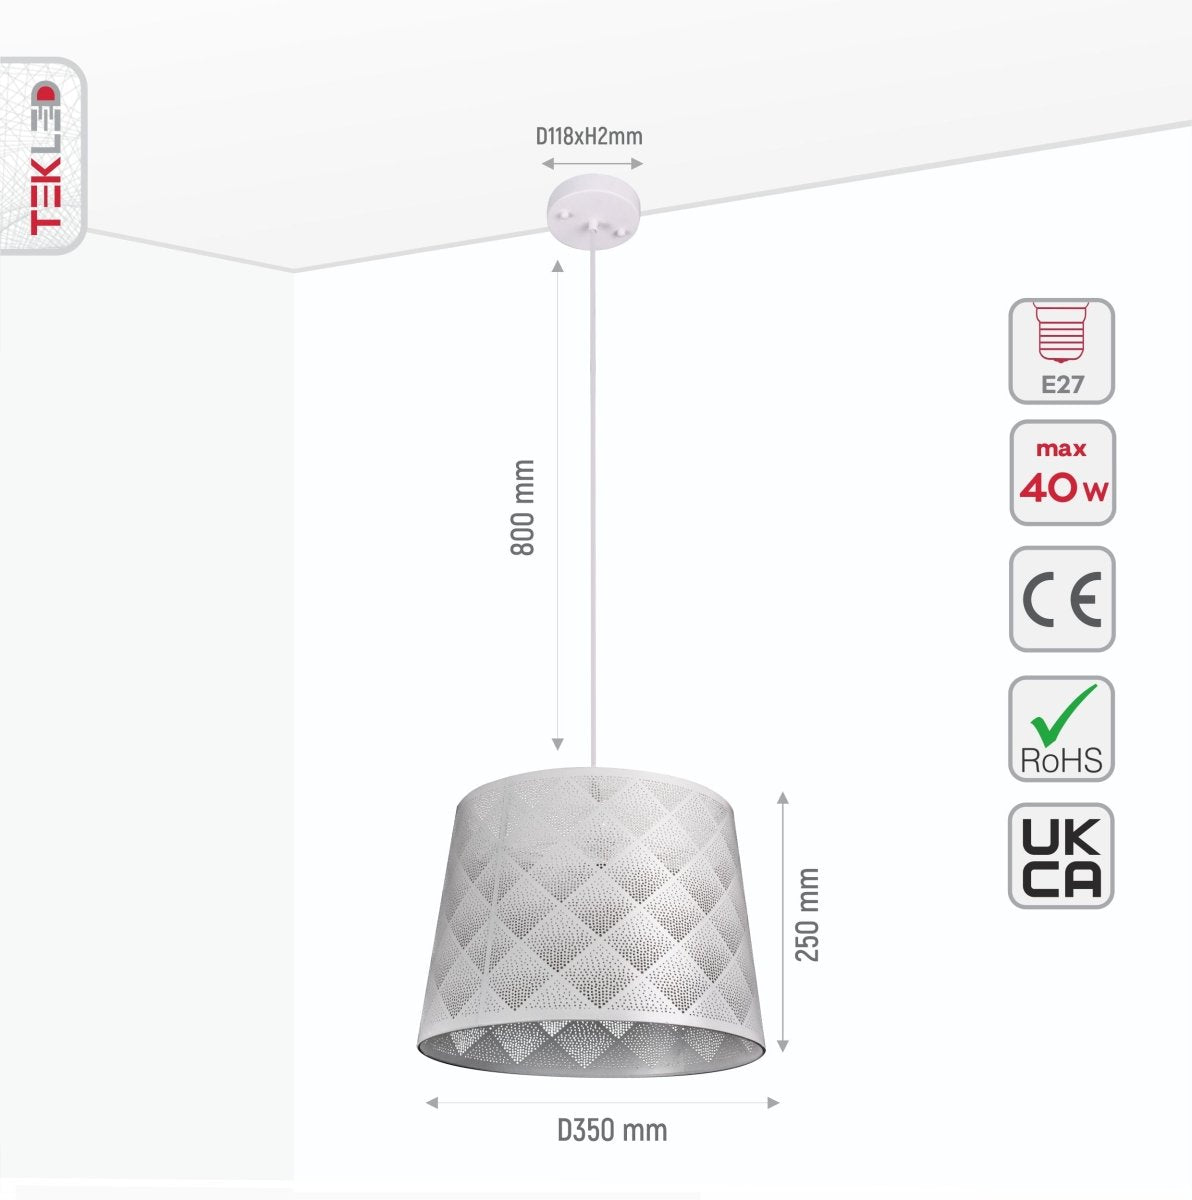 Size and specs of White Metal Frustum Checkered Pendant Light with E27 Fitting | TEKLED 150-18342